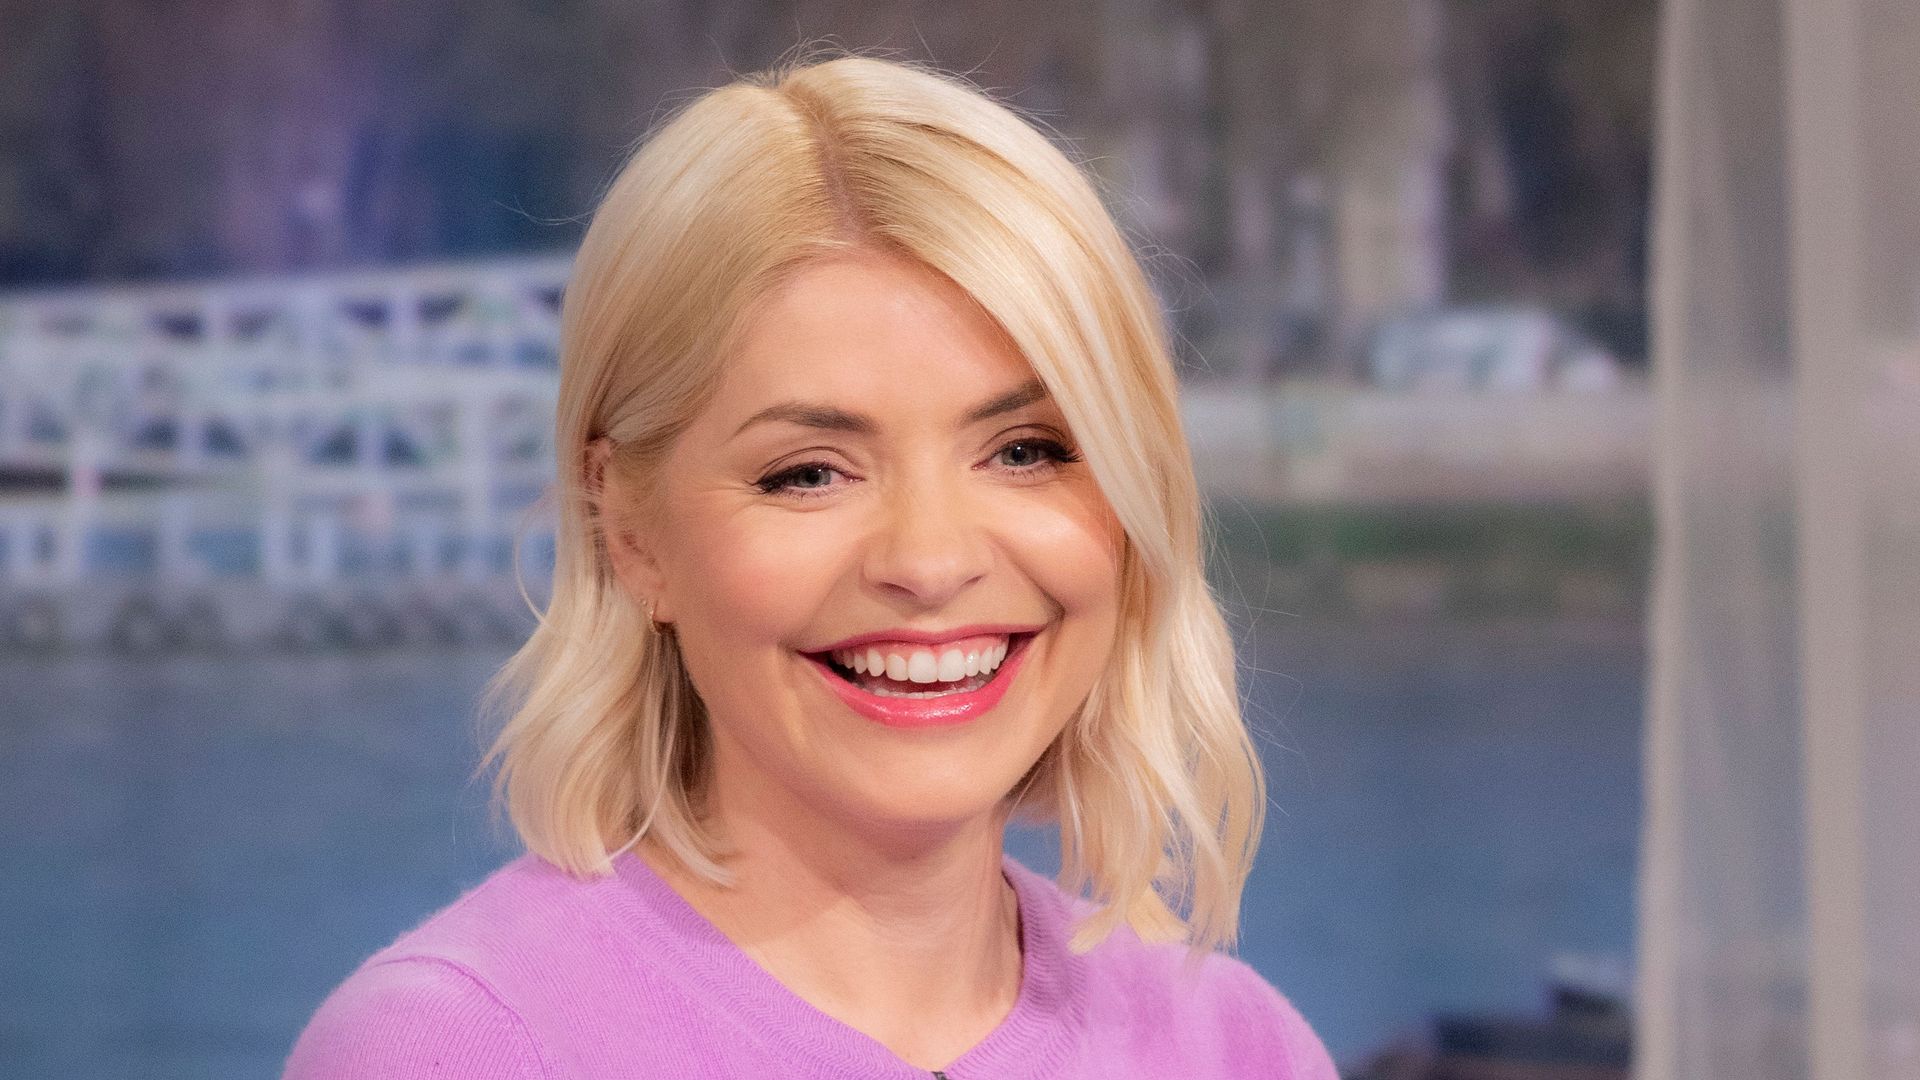 Holly Willoughby
